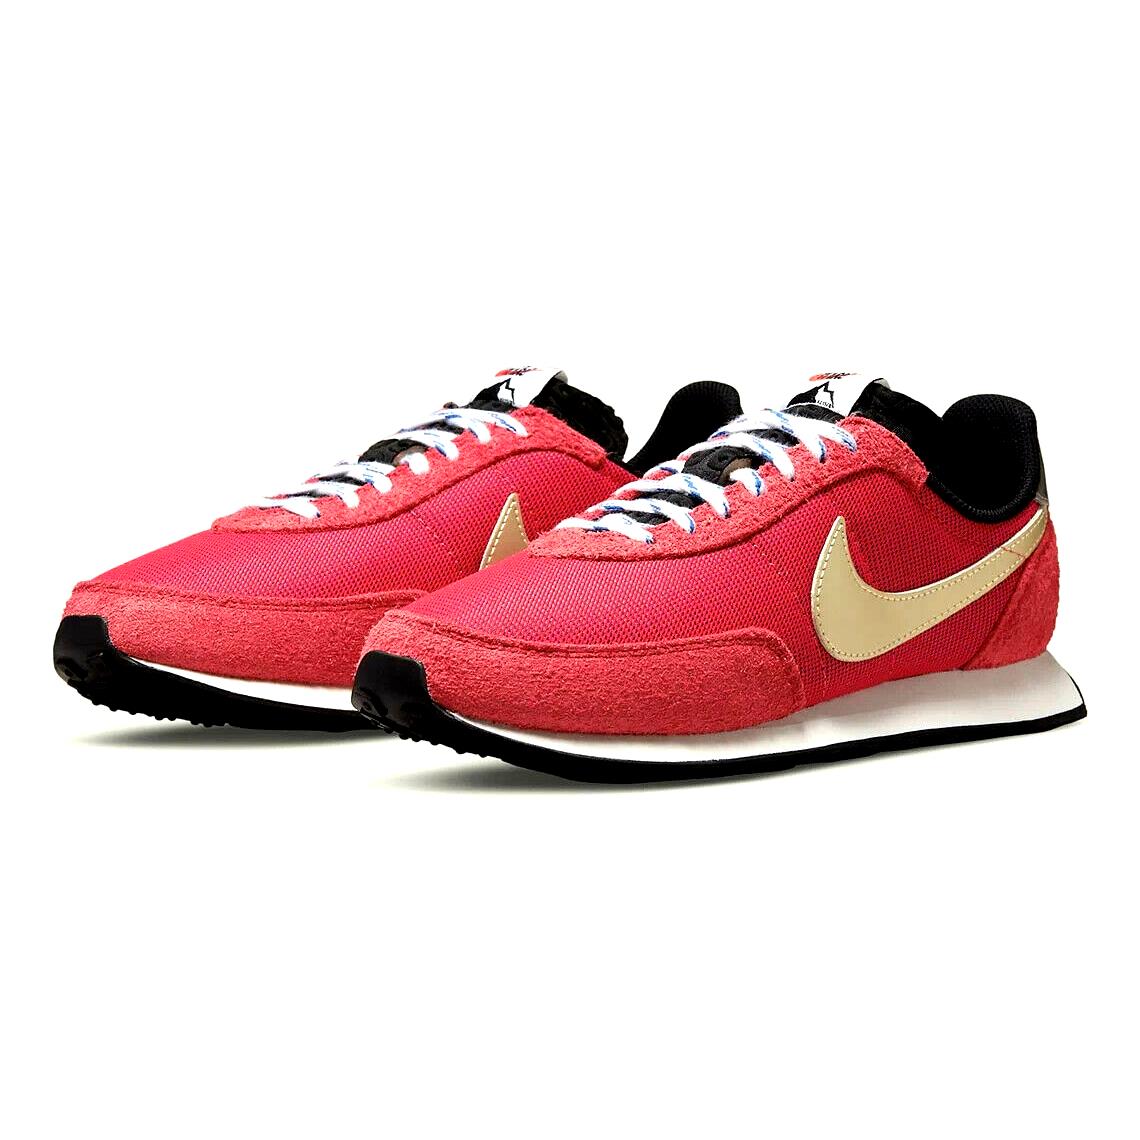 Nike Waffle Trainer 2 SD Mens Size 11 Sneaker Shoes DC8865 600 Gym Red